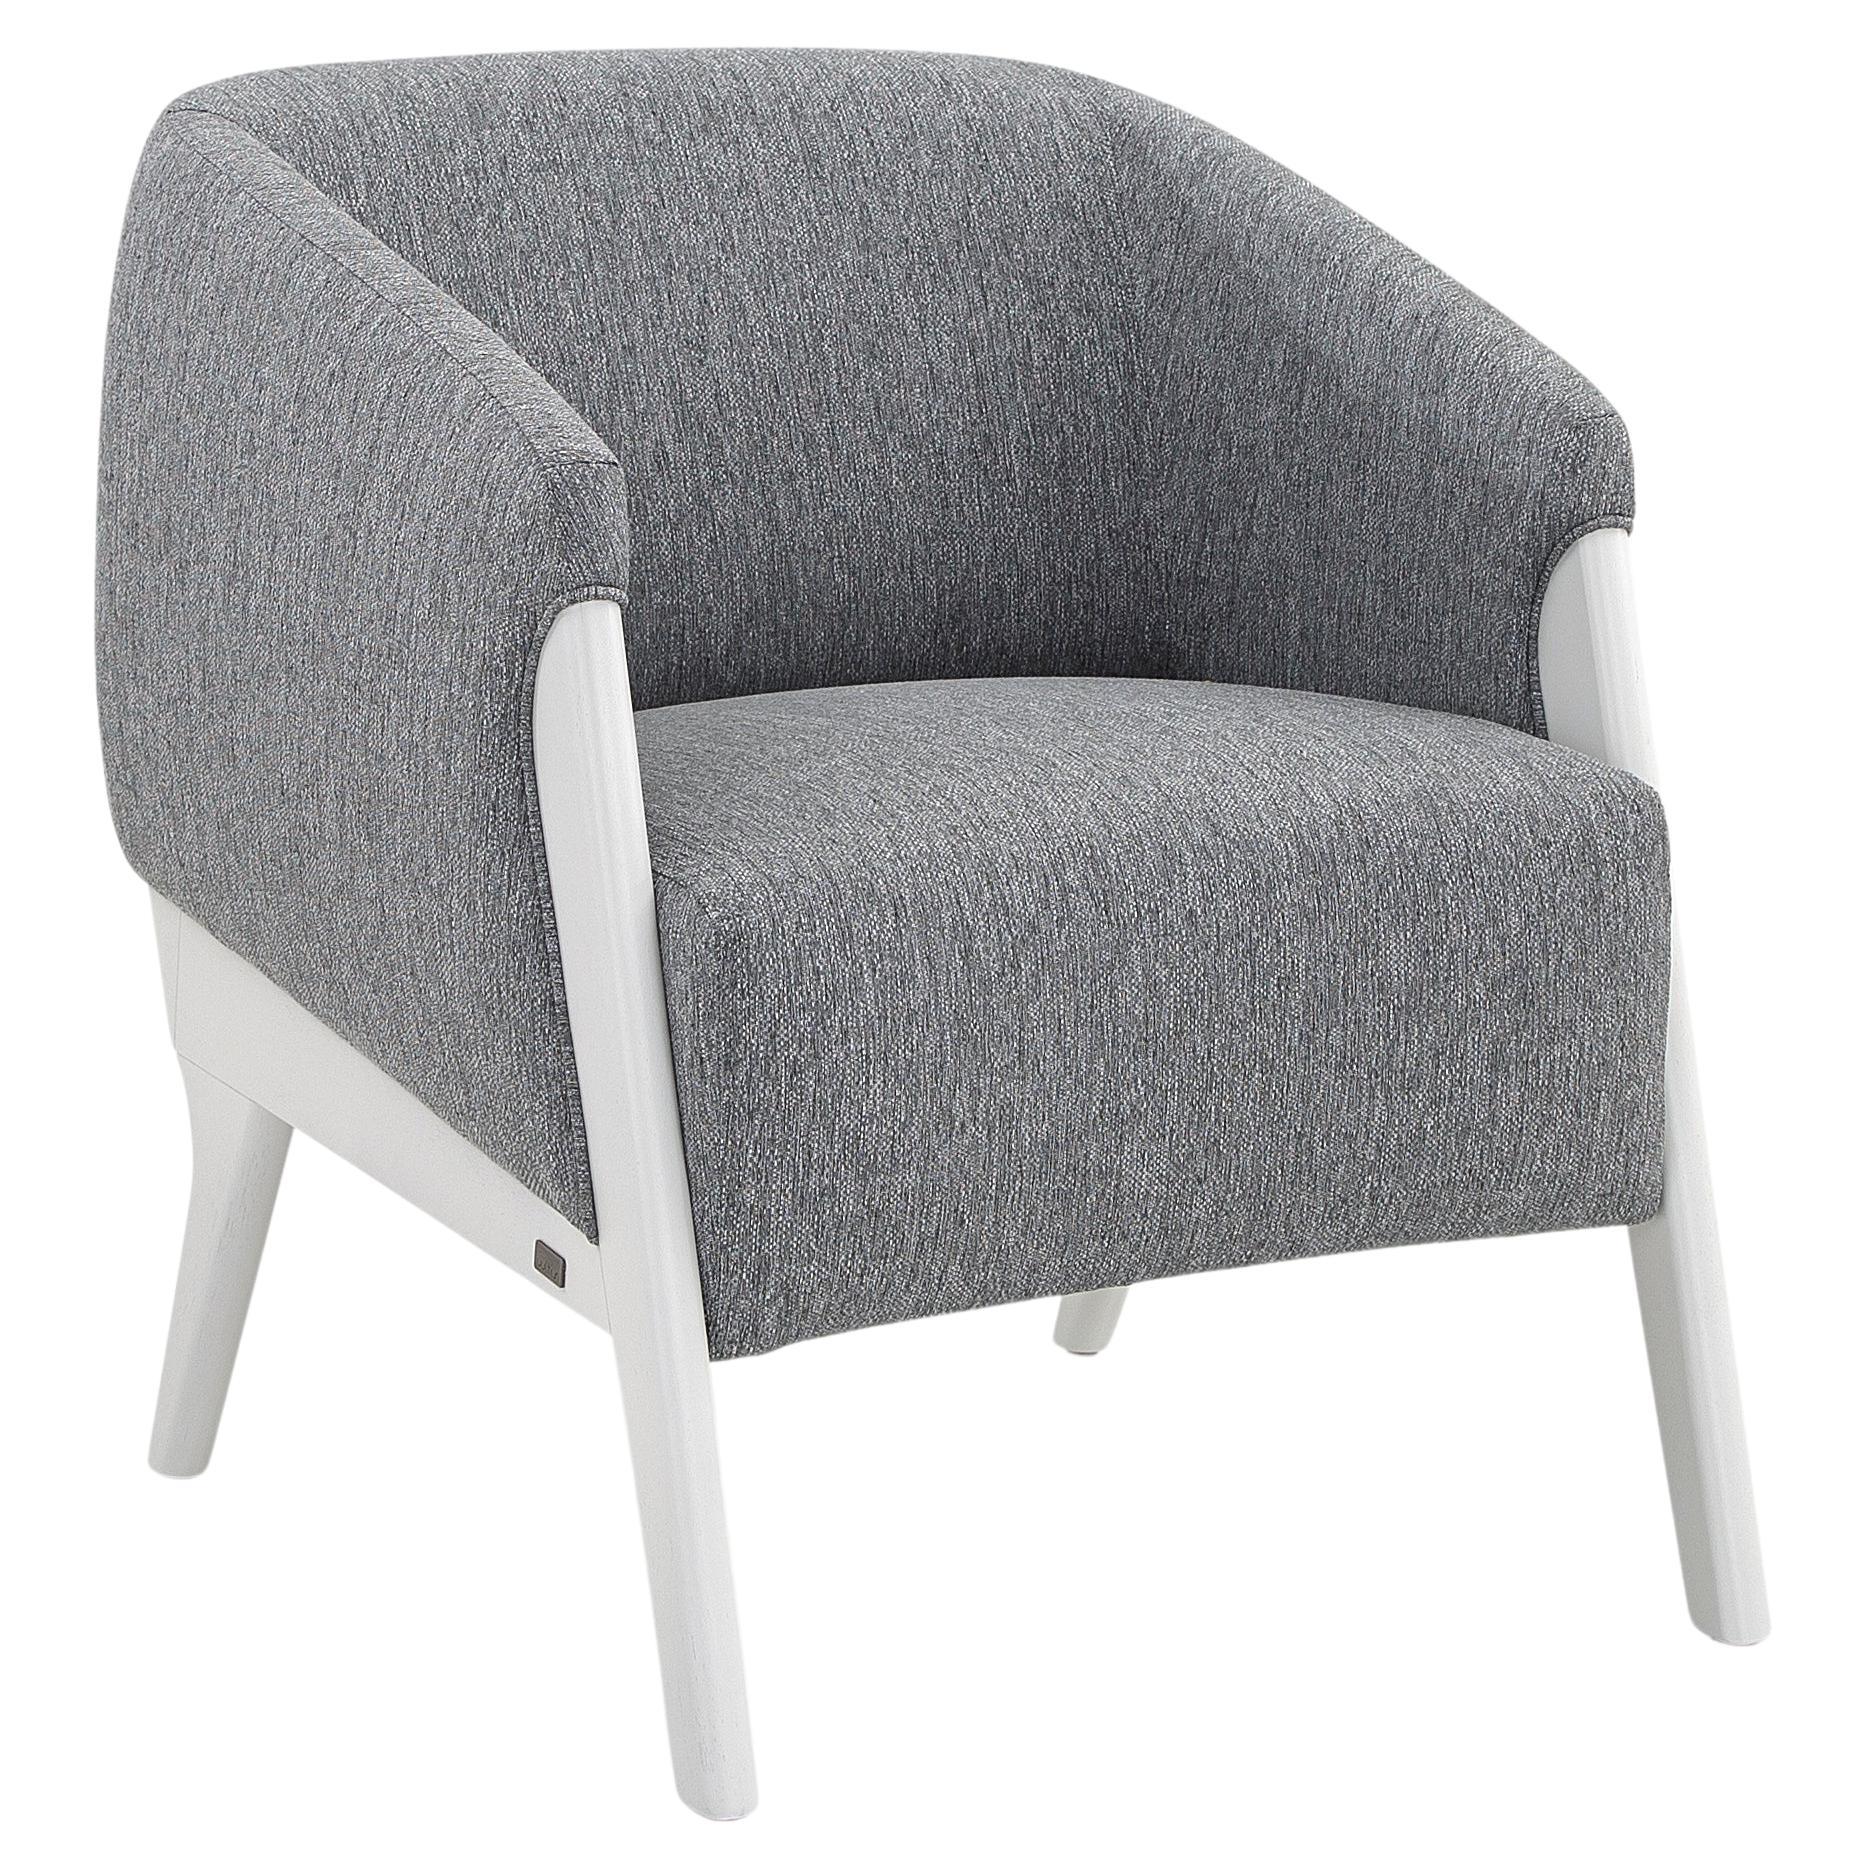 Abra Armchair in Gray Fabric and White Wood Finish For Sale